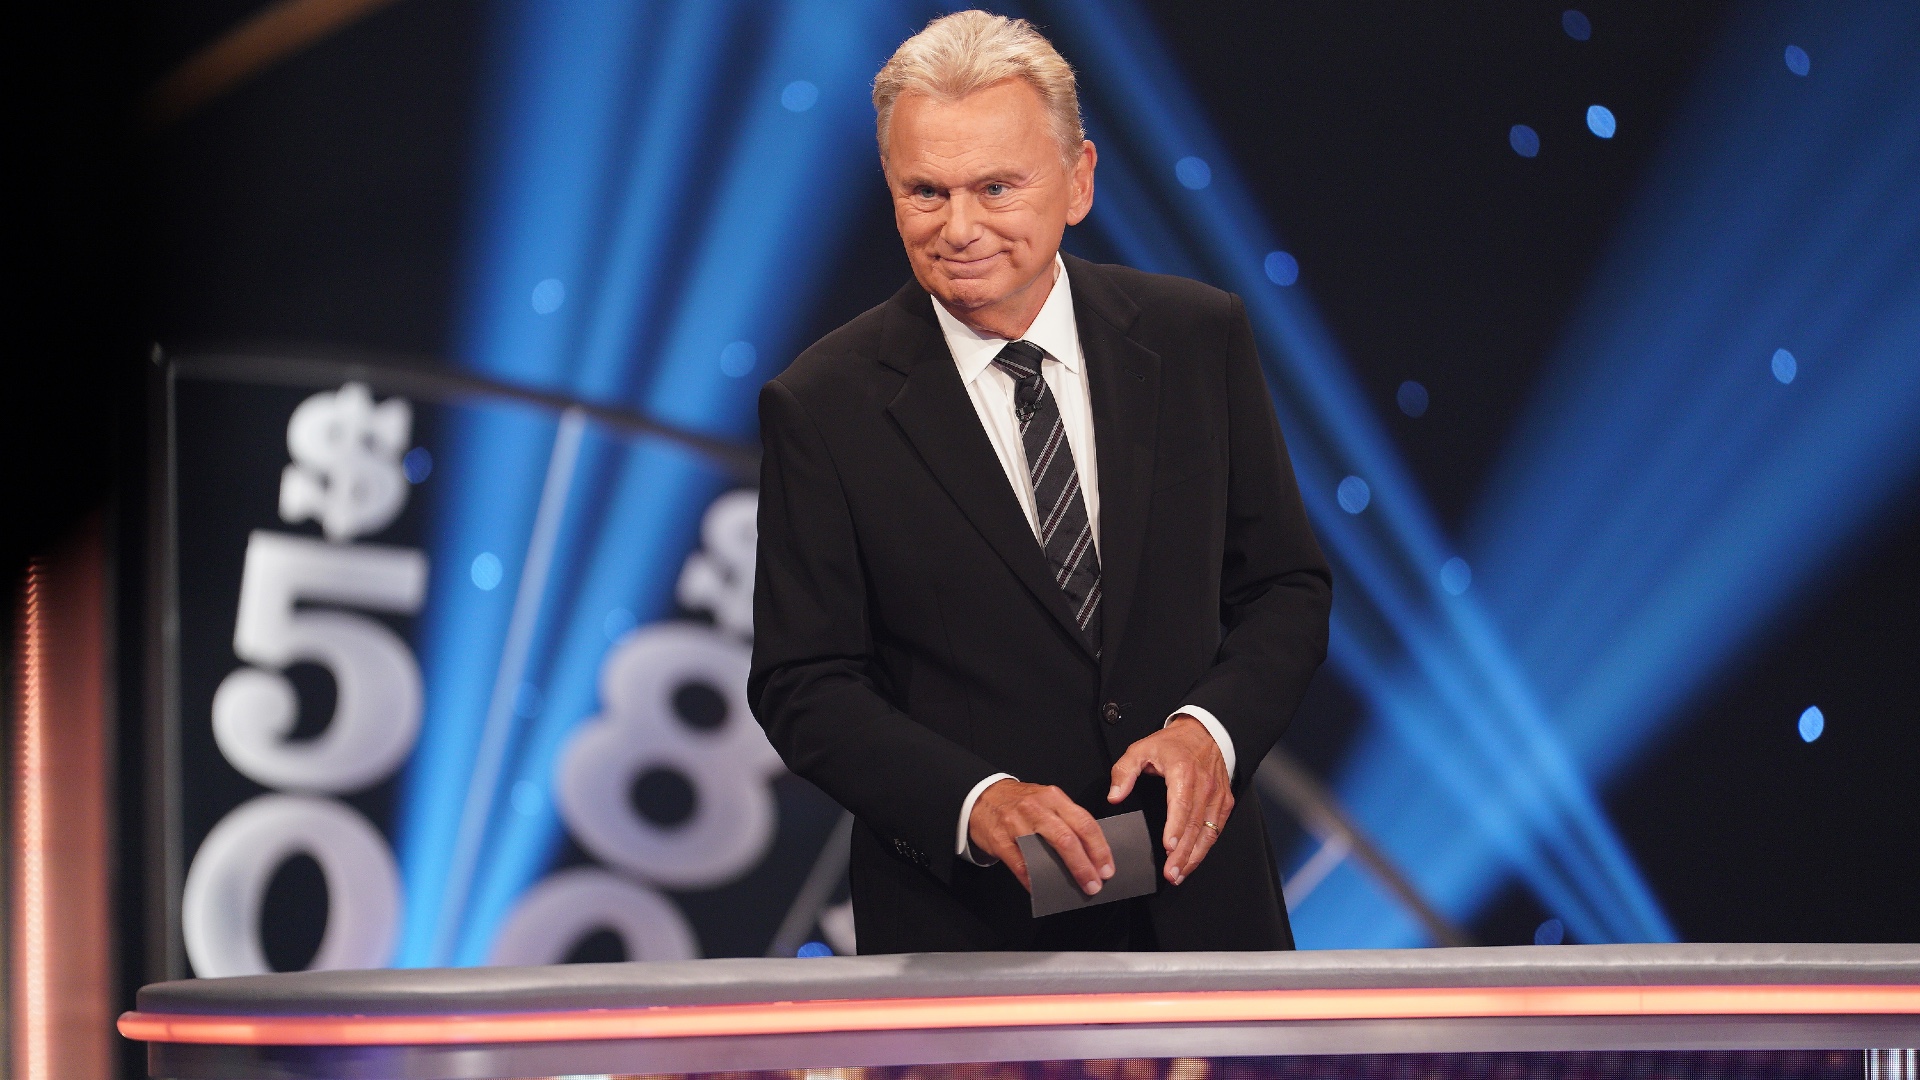 Pat Sajak Roughhouses With Wrestler Who Took Down ‘Wheel of Fortune’